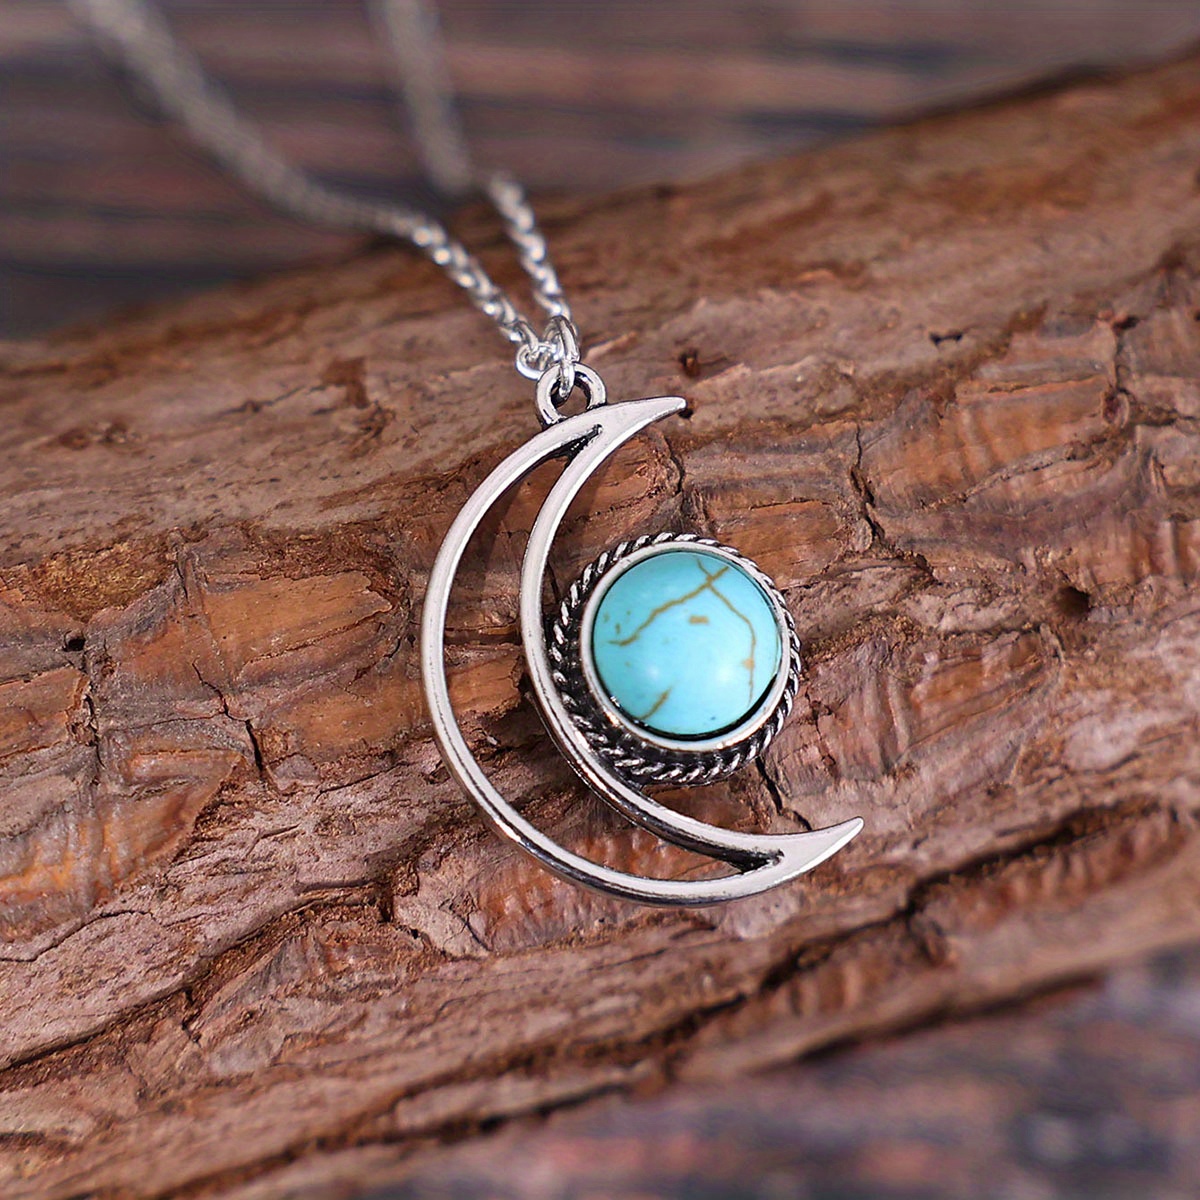 Boho Moon Turquoise Pendant Necklace Silver Plated Neck